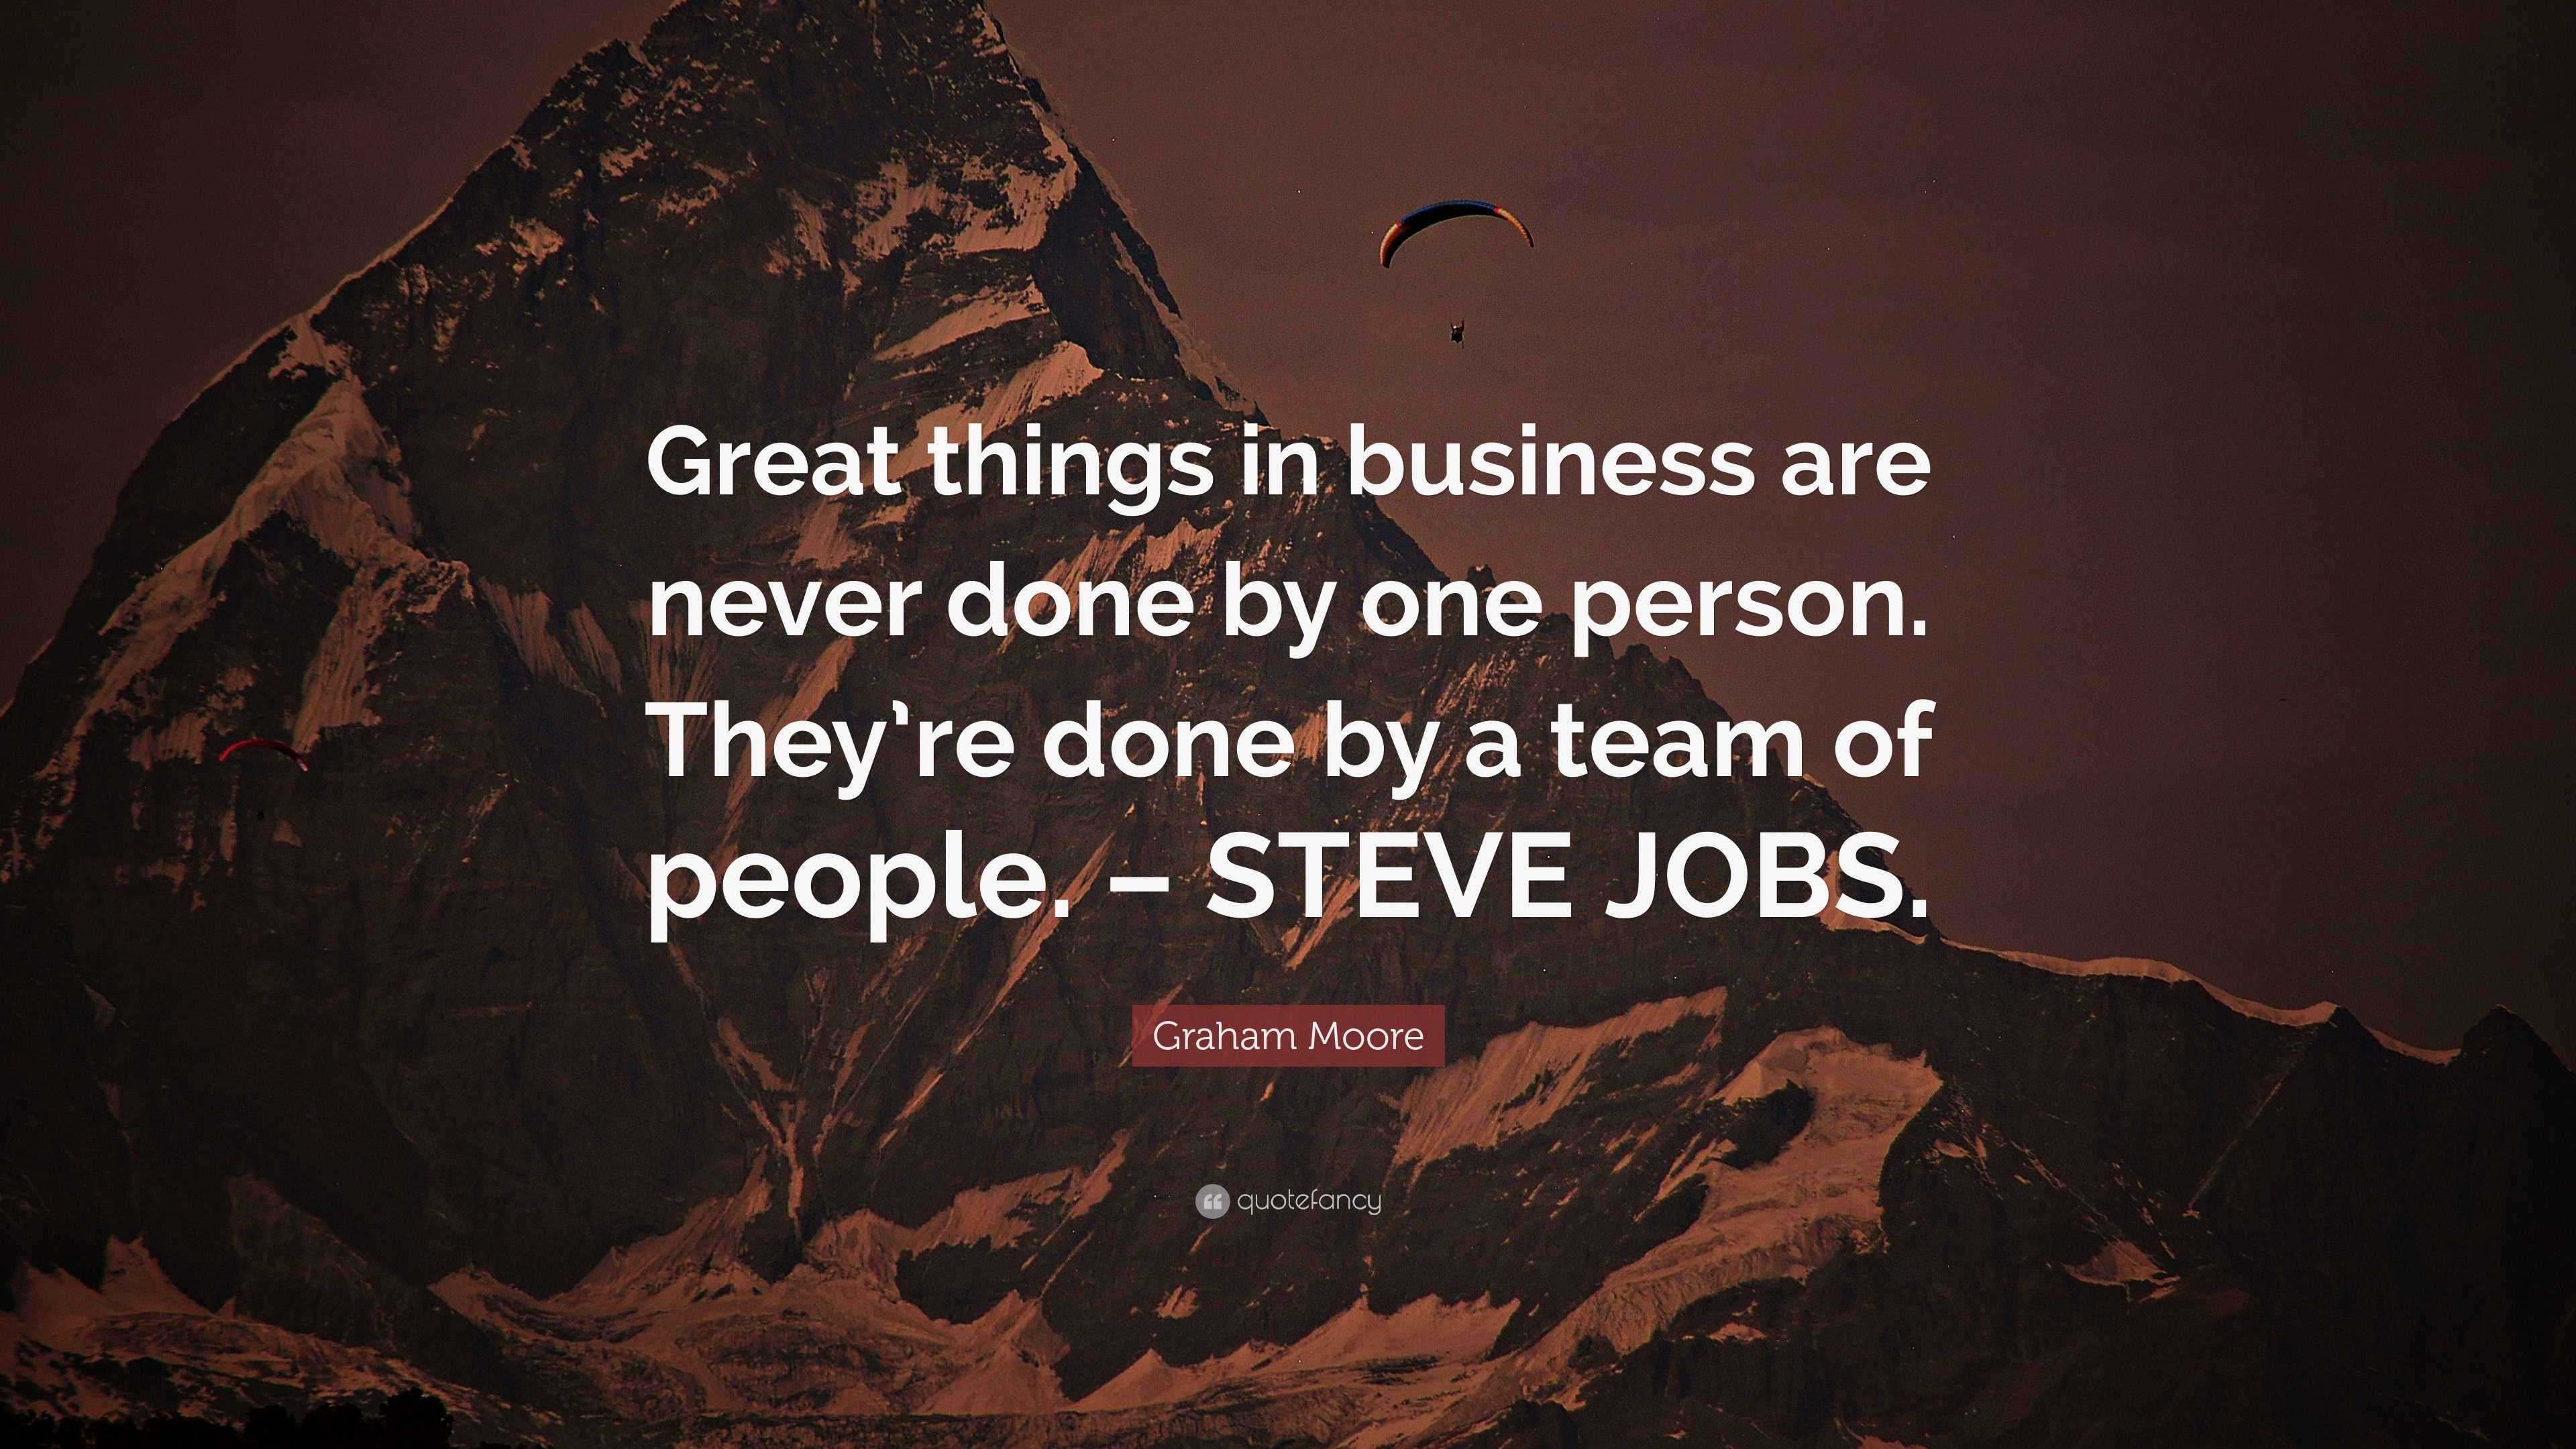 Graham Moore Quote: “Great things in business are never done by one ...